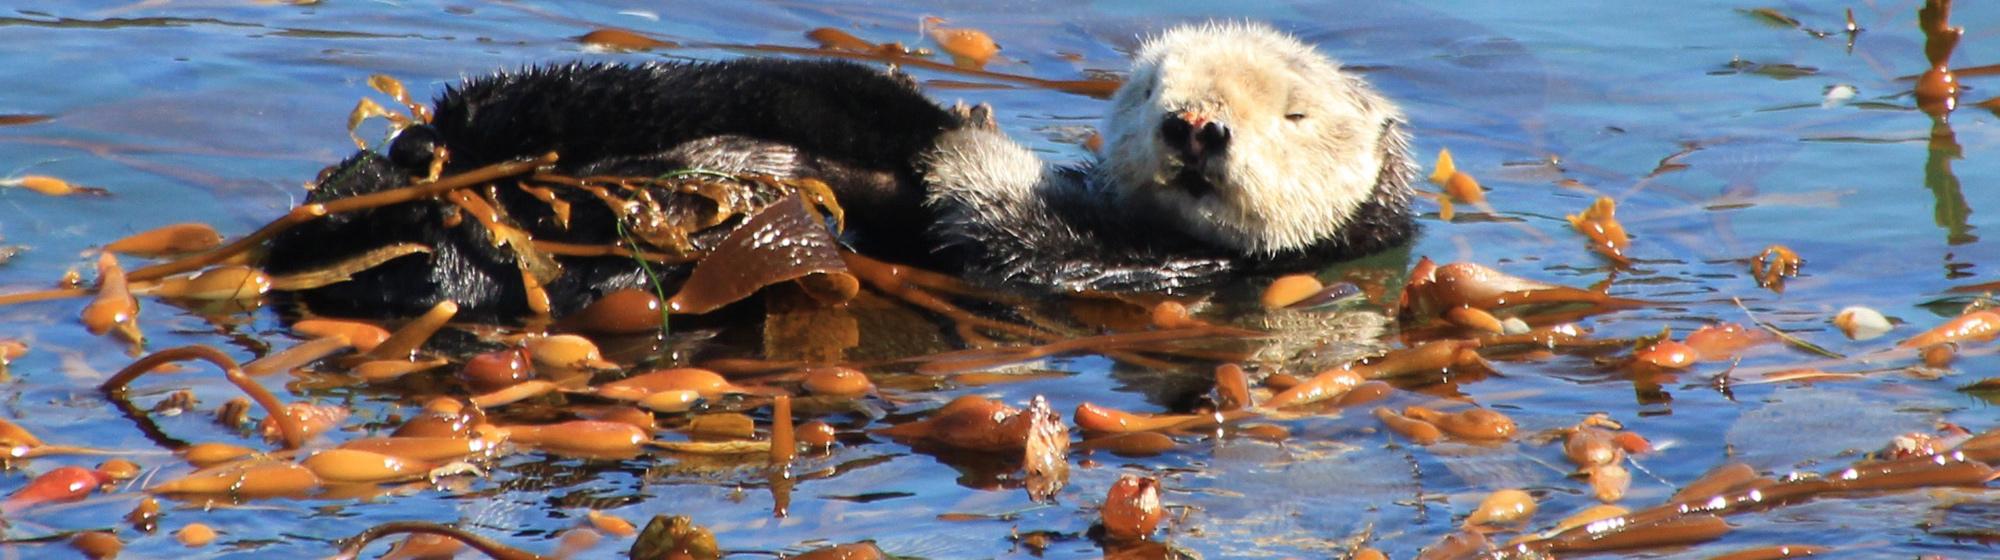 Photo of Sea otter in the waters of Point Lobos State Natural Reserve. Photo credit: Robert Grace.